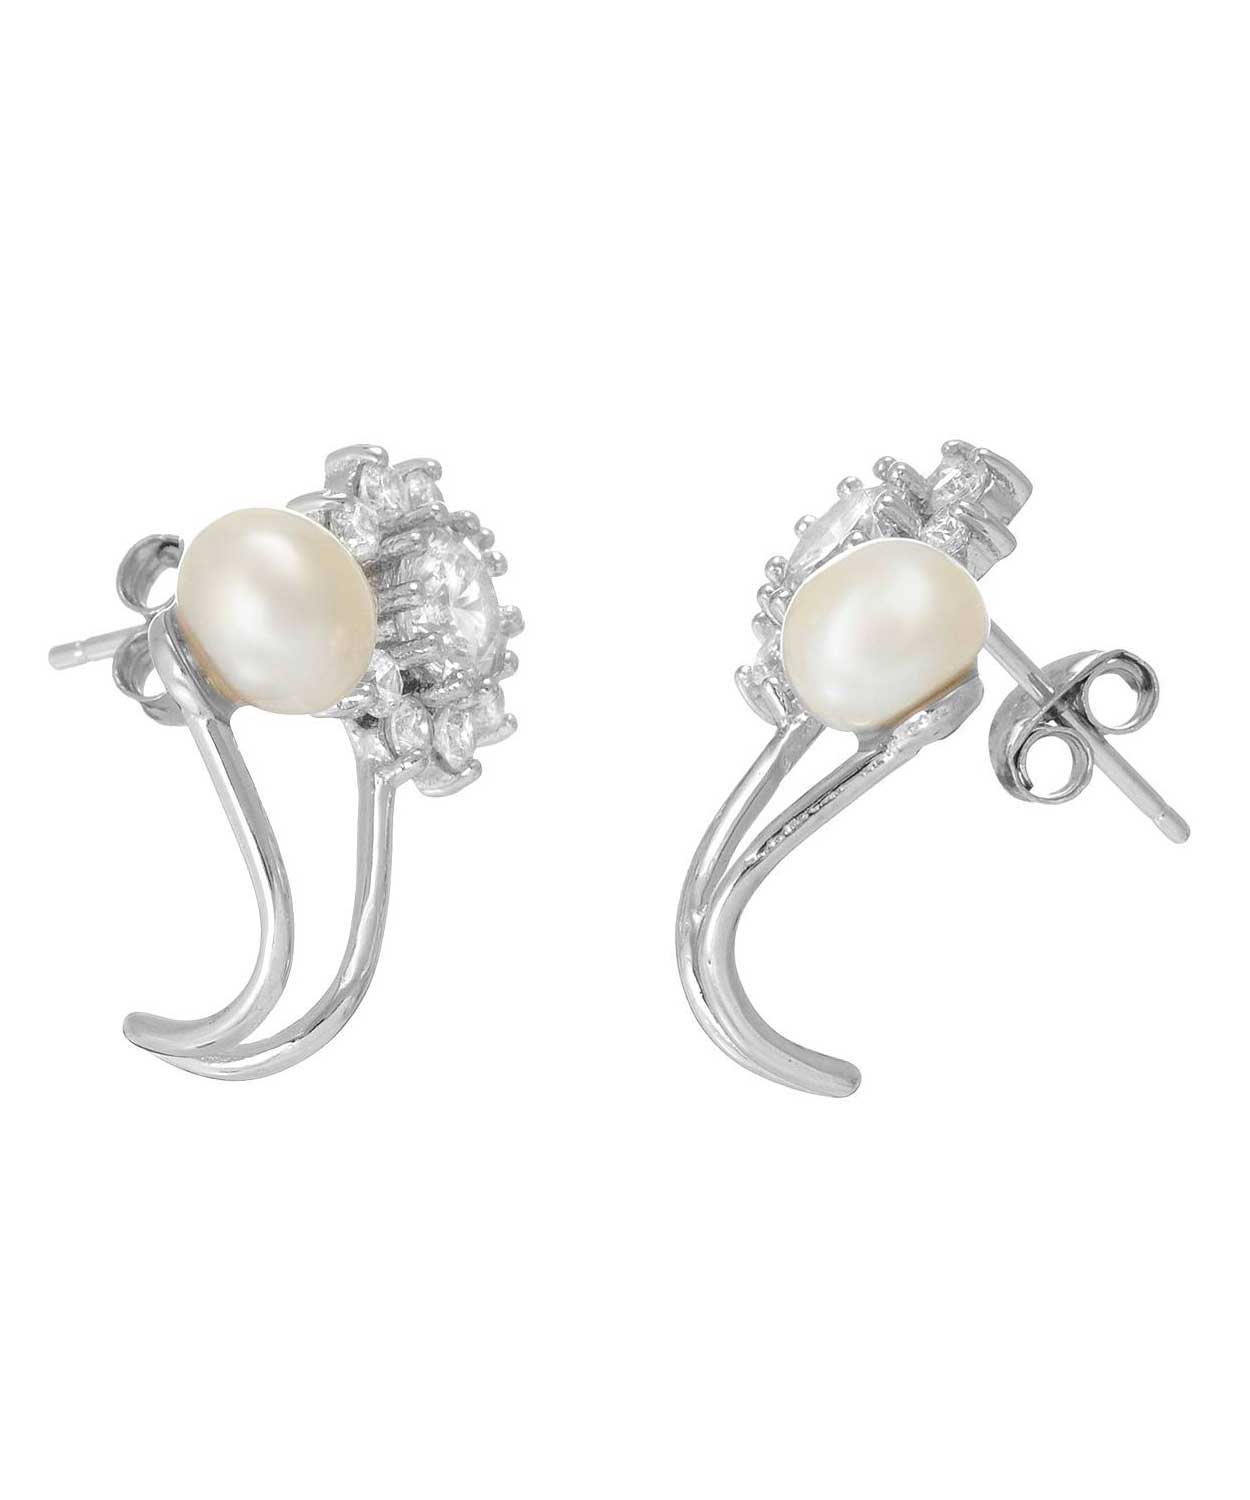 Brilliant Cut Cubic Zirconia and Freshwater Pearl 925 Sterling Silver Flower Earrings View 2